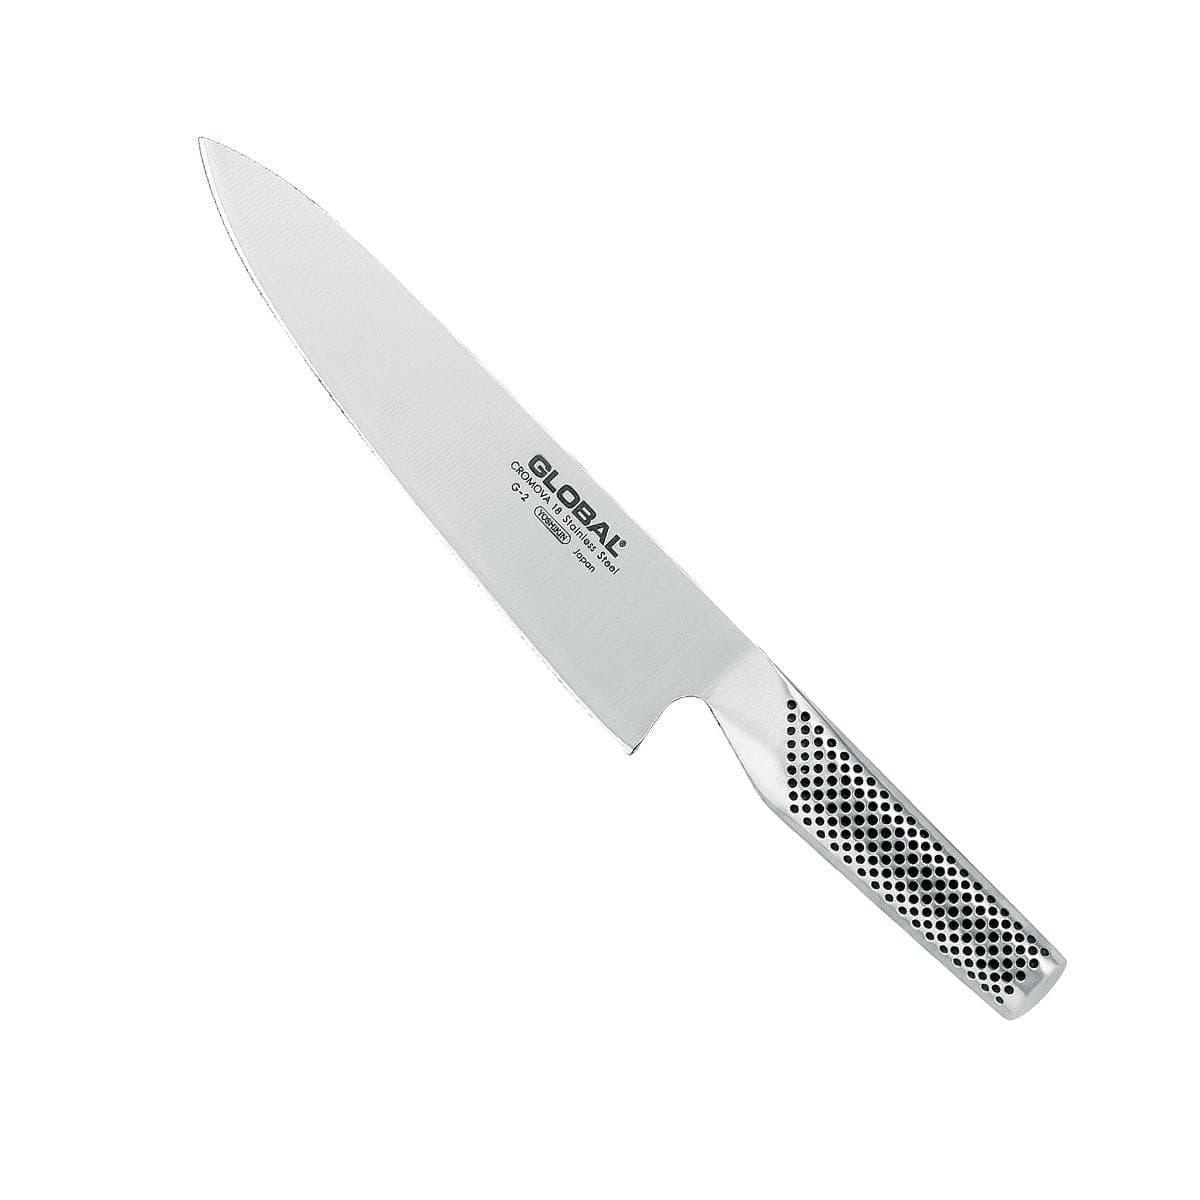 Global Classic 6 1/4 in. Meat Cleaver G-12